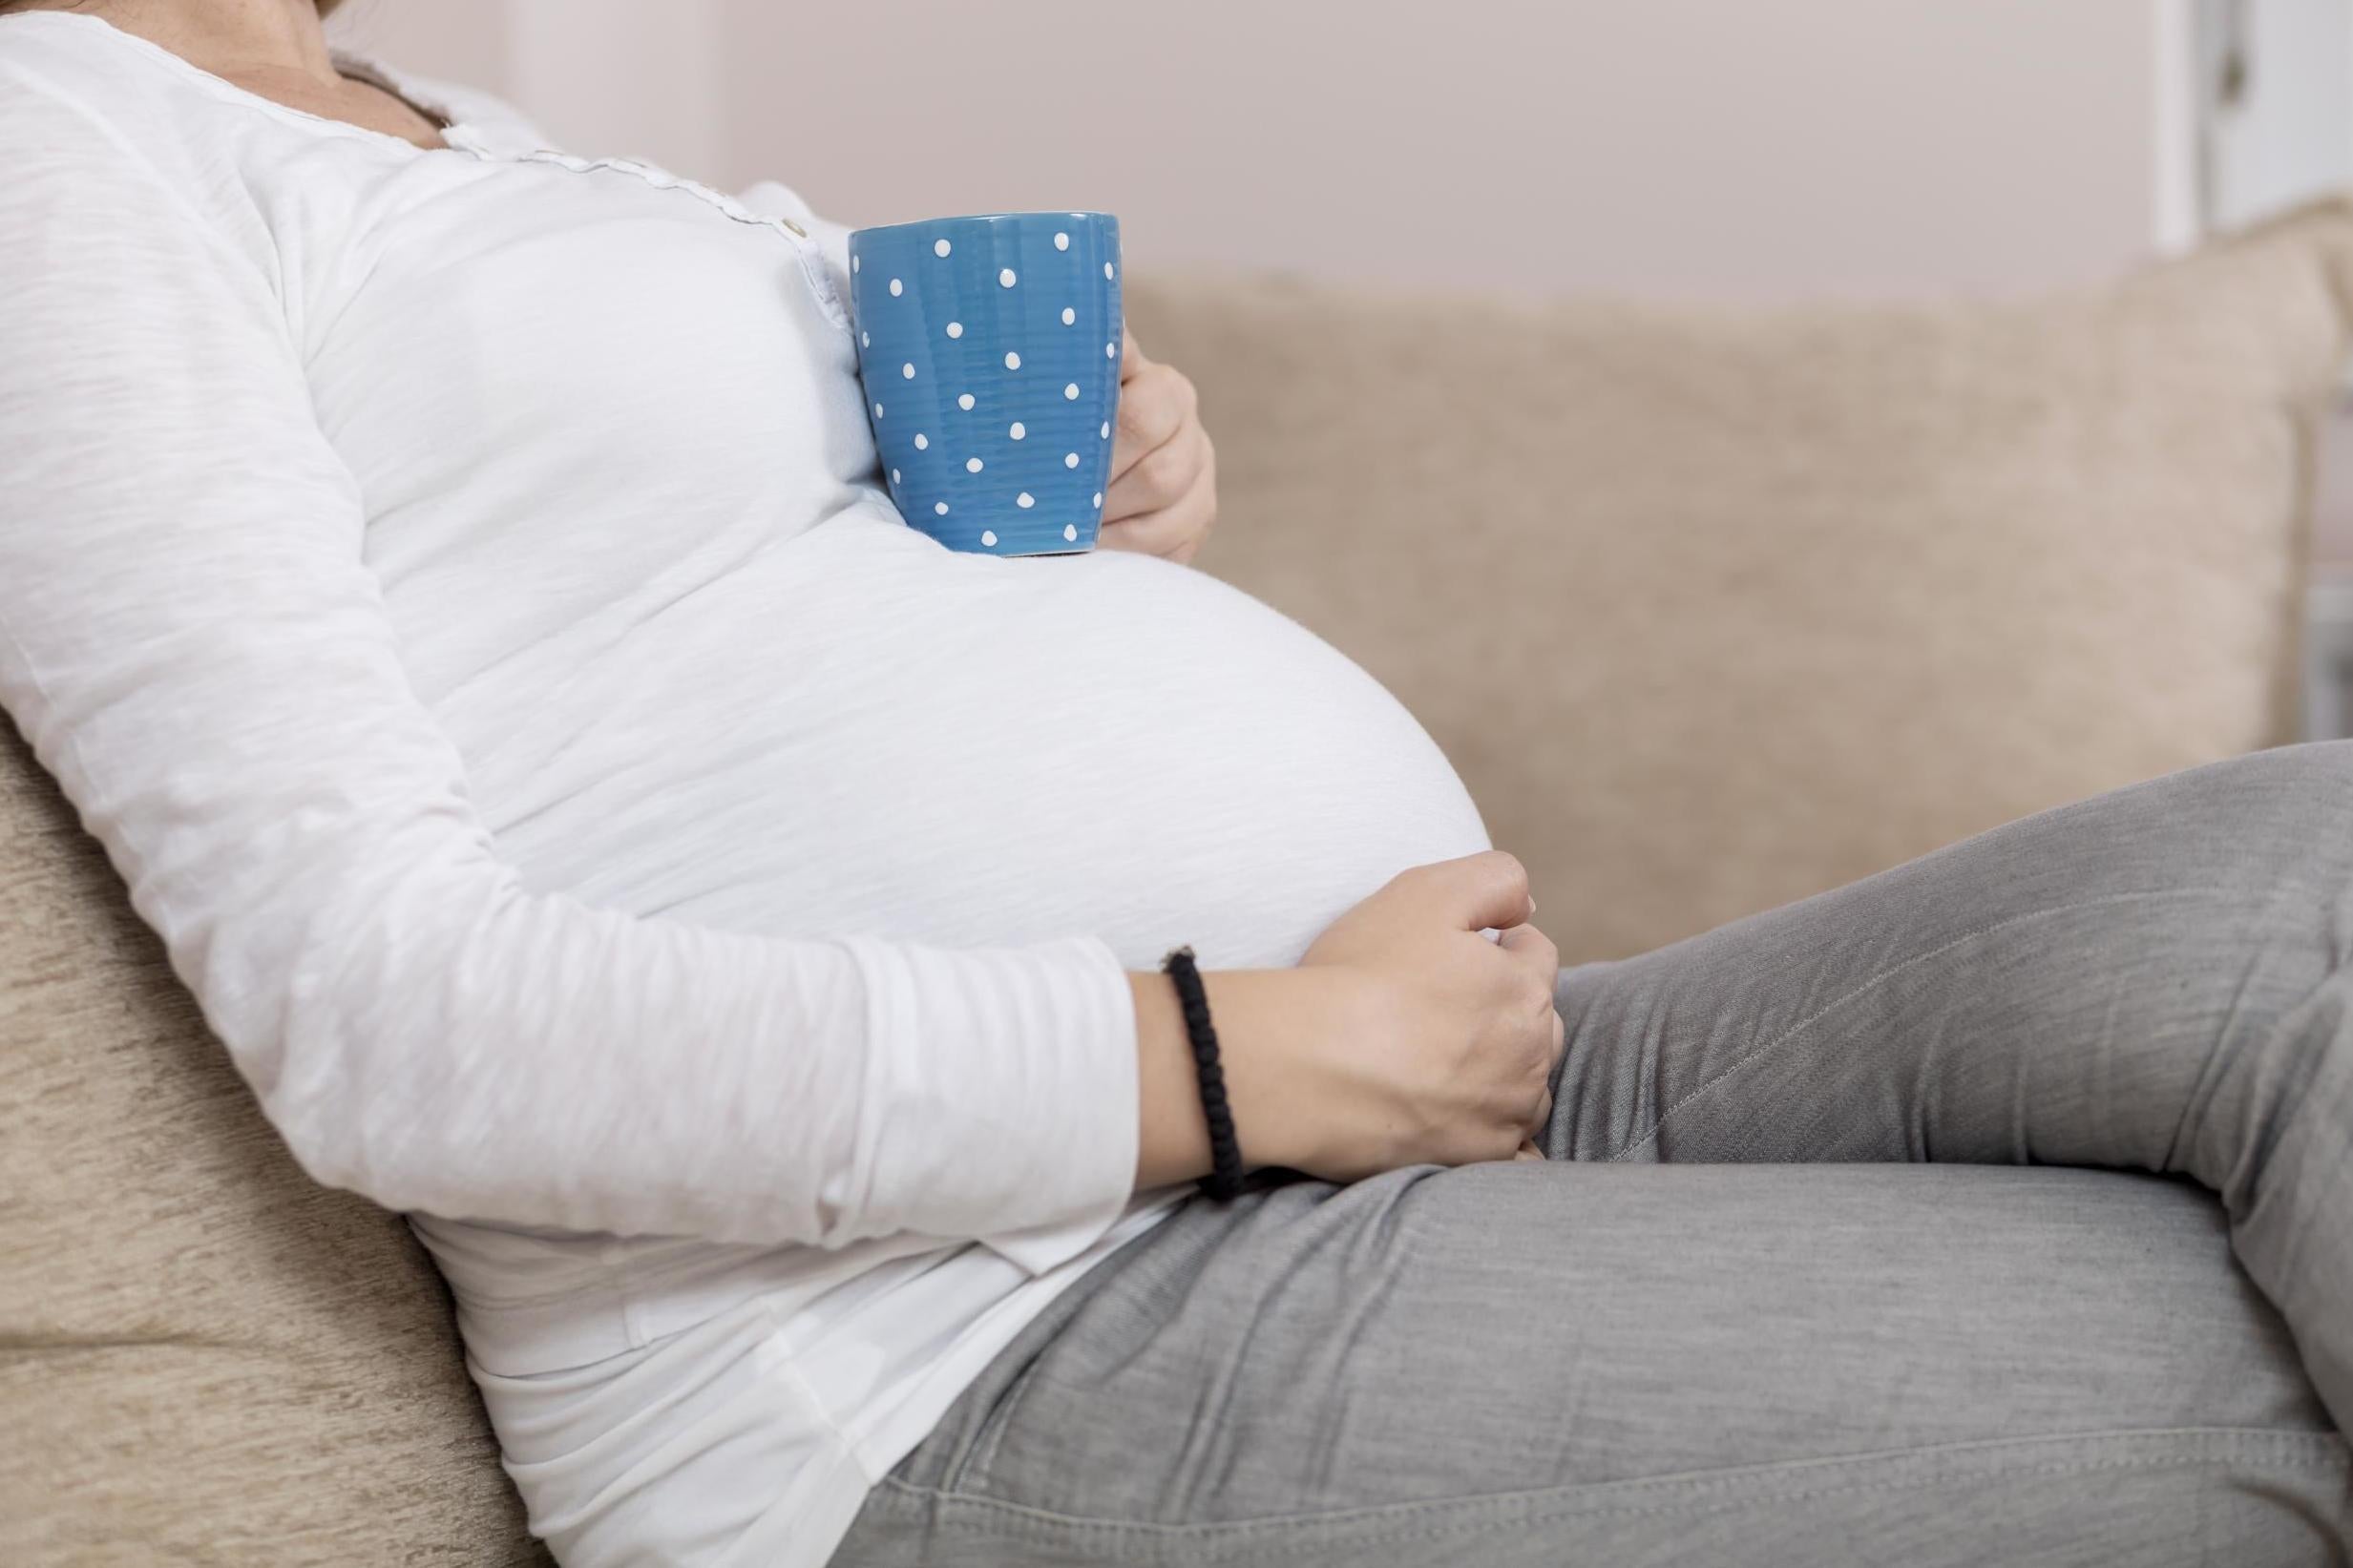 Pregnant woman shares her response to unsolicited advice (Stock)